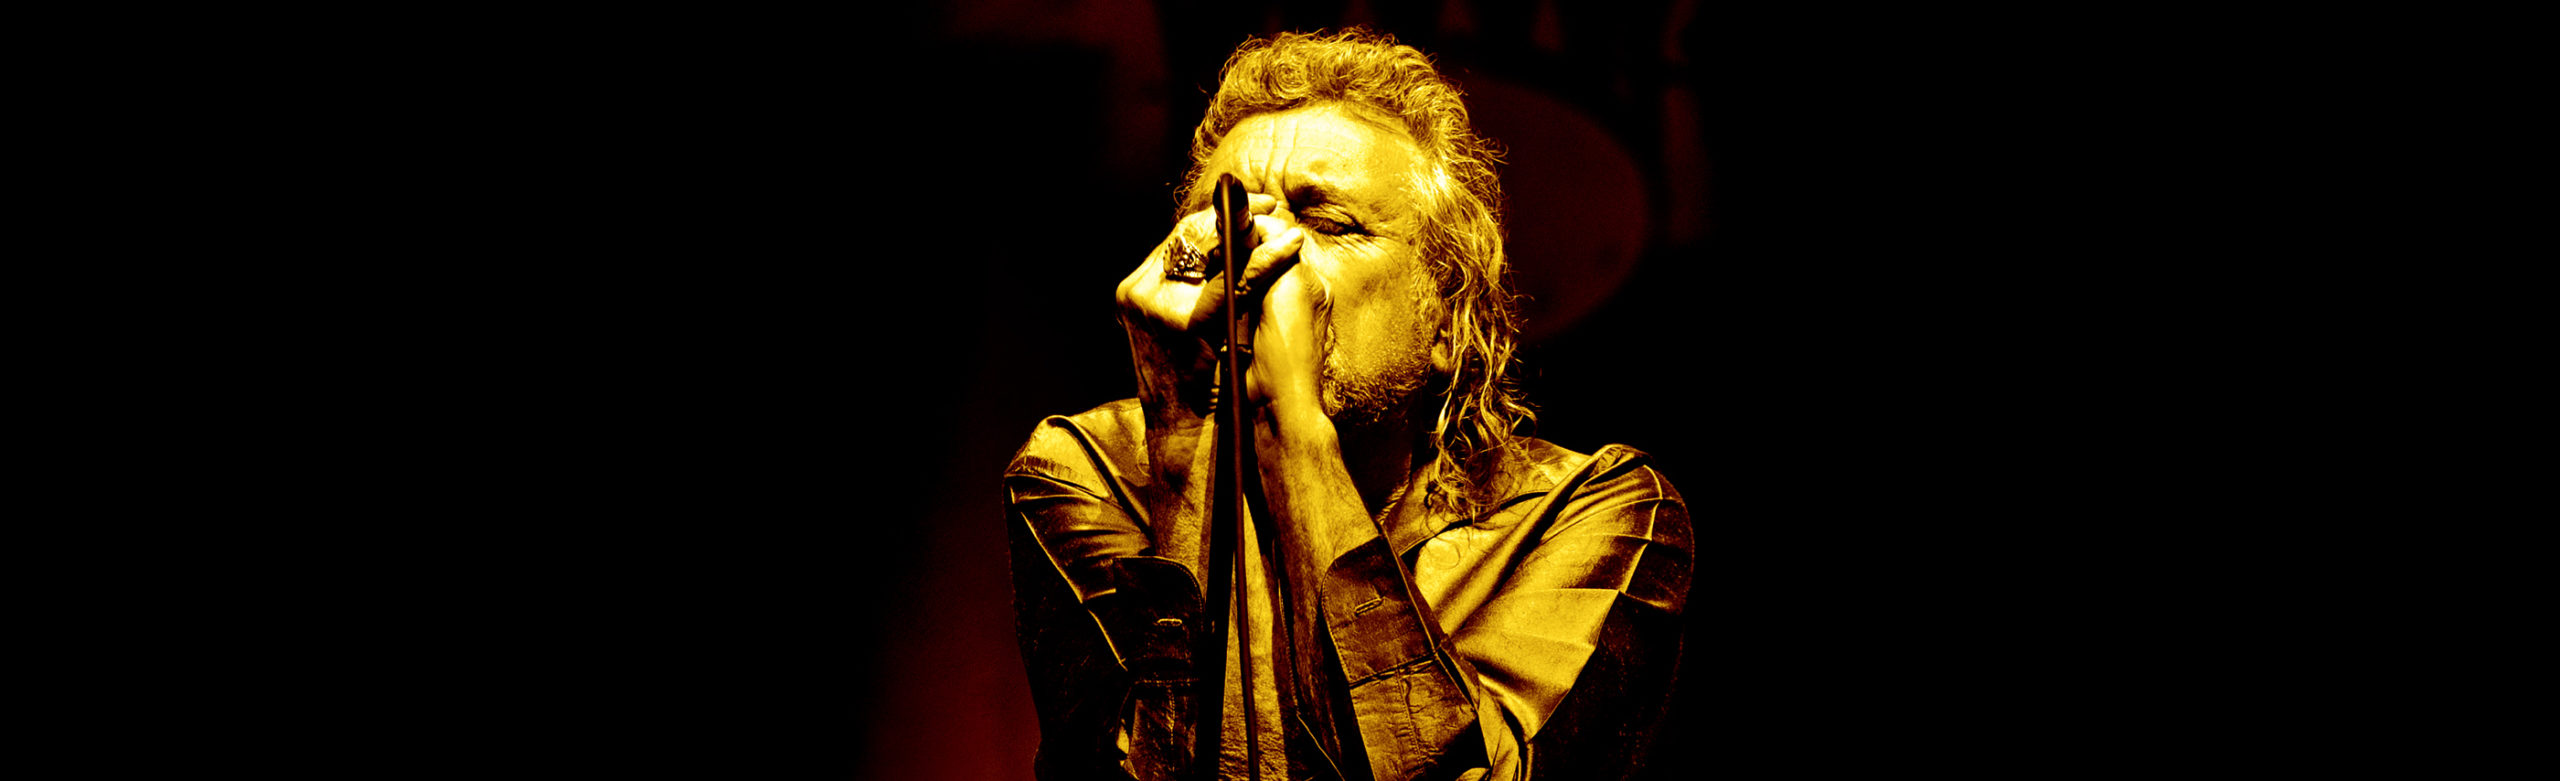 SCALPER WARNING: Robert Plant and The Sensational Space Shifters at KettleHouse Amphitheater Image